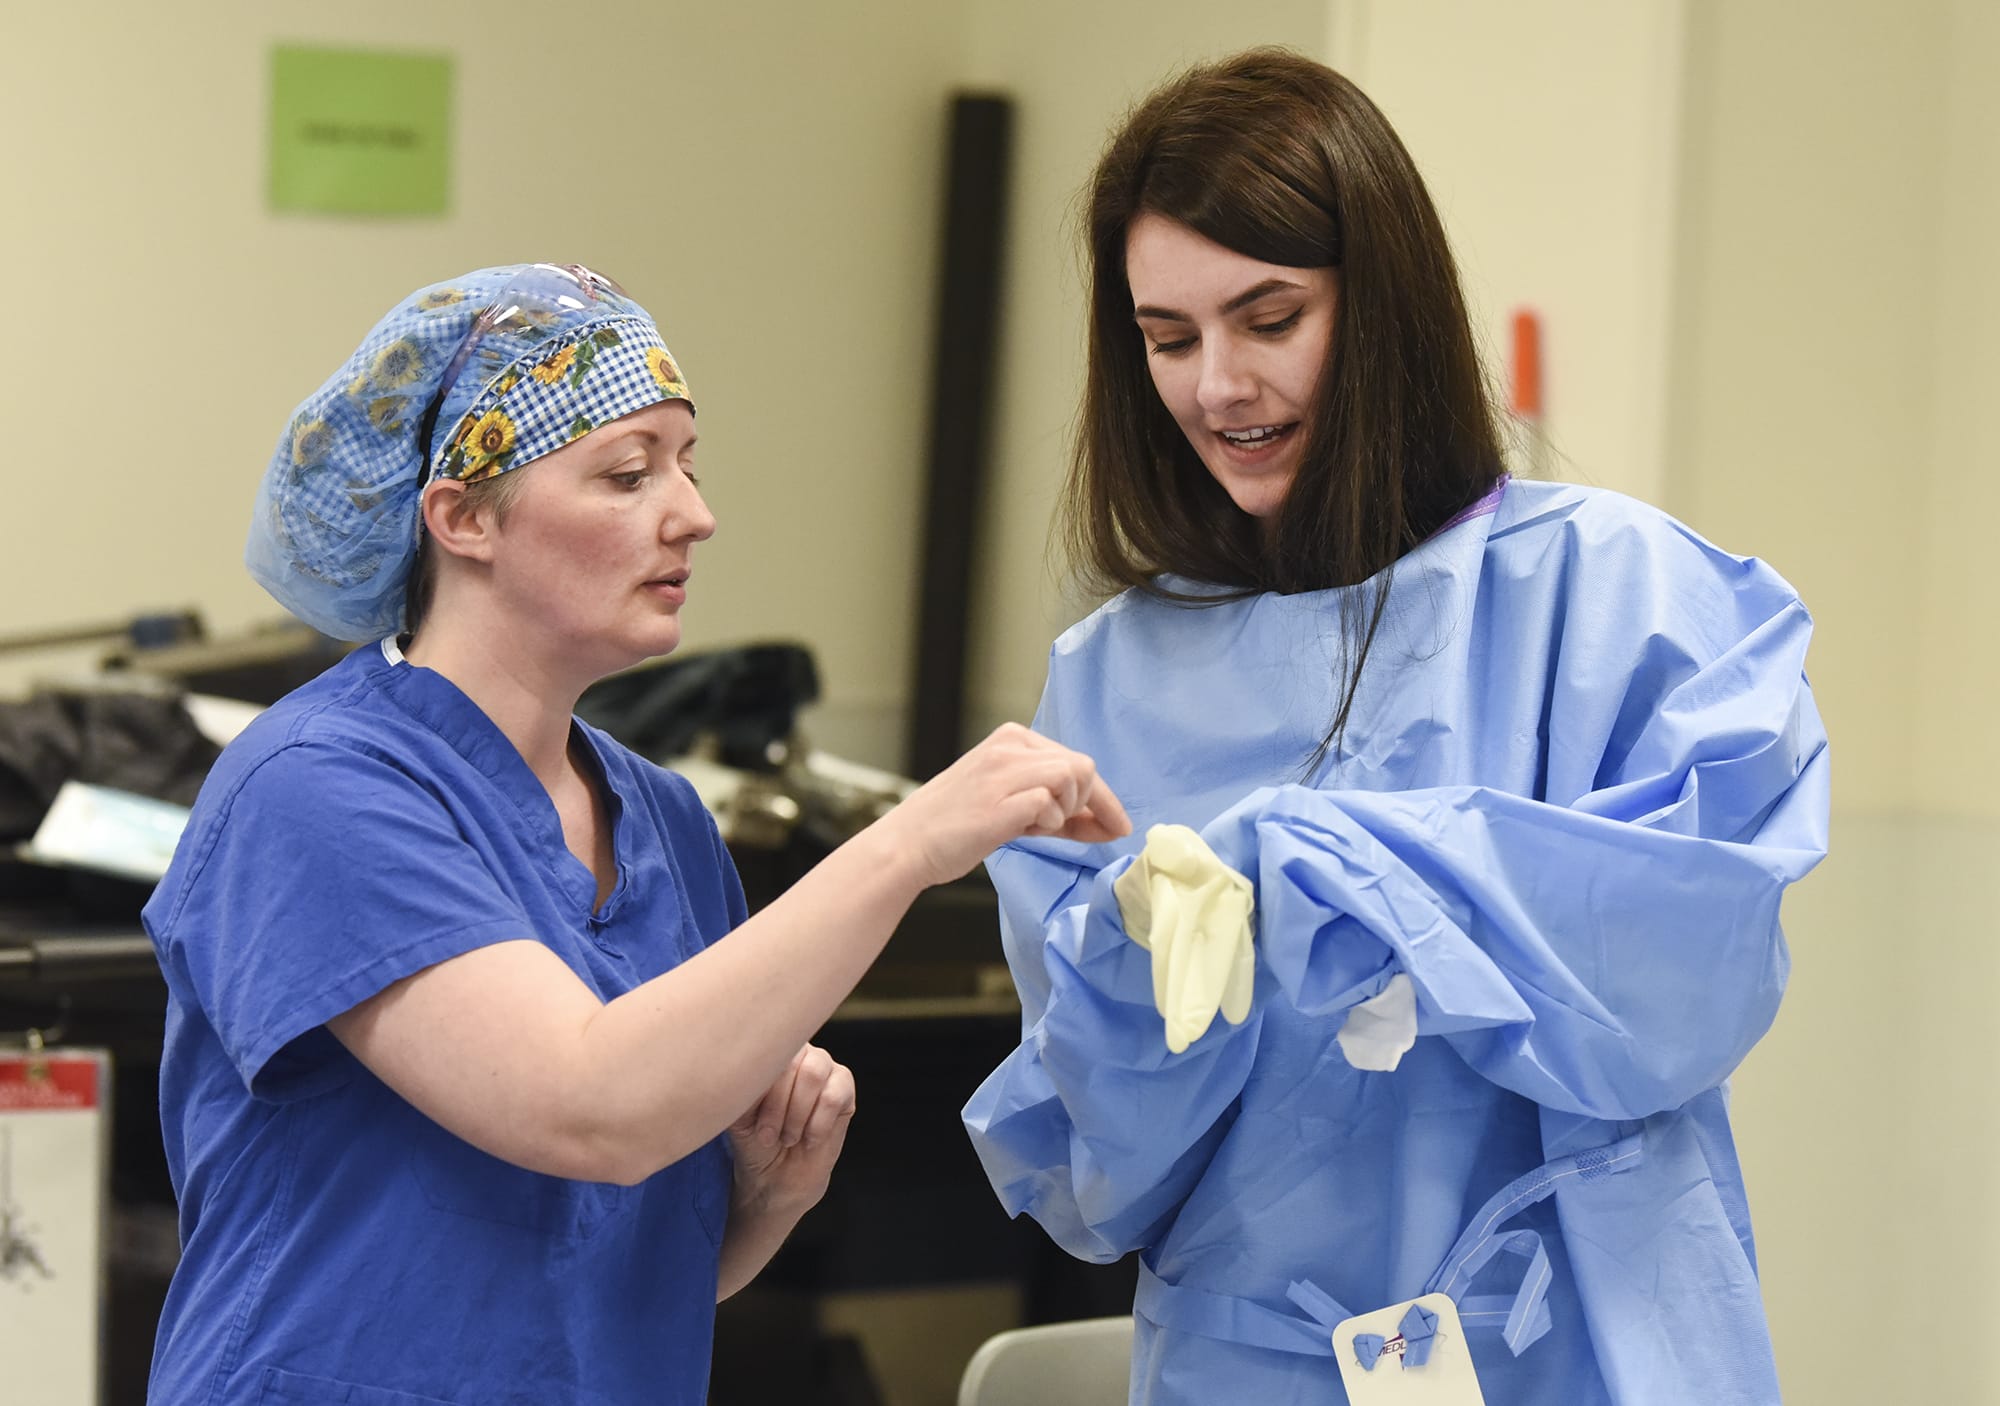 Joanie Yocum, the robotics coordinator for urology and gynecology at Legacy Salmon Creek Medical Center, left, assists Anndres Olson, 26, a student in the Elson S. Floyd College of Medicine at Washington State University, as she attempts to put on a glove following sterile procedures for a lesson on scrubbing for surgeries at Legacy Salmon Creek, Monday March 26, 2018.